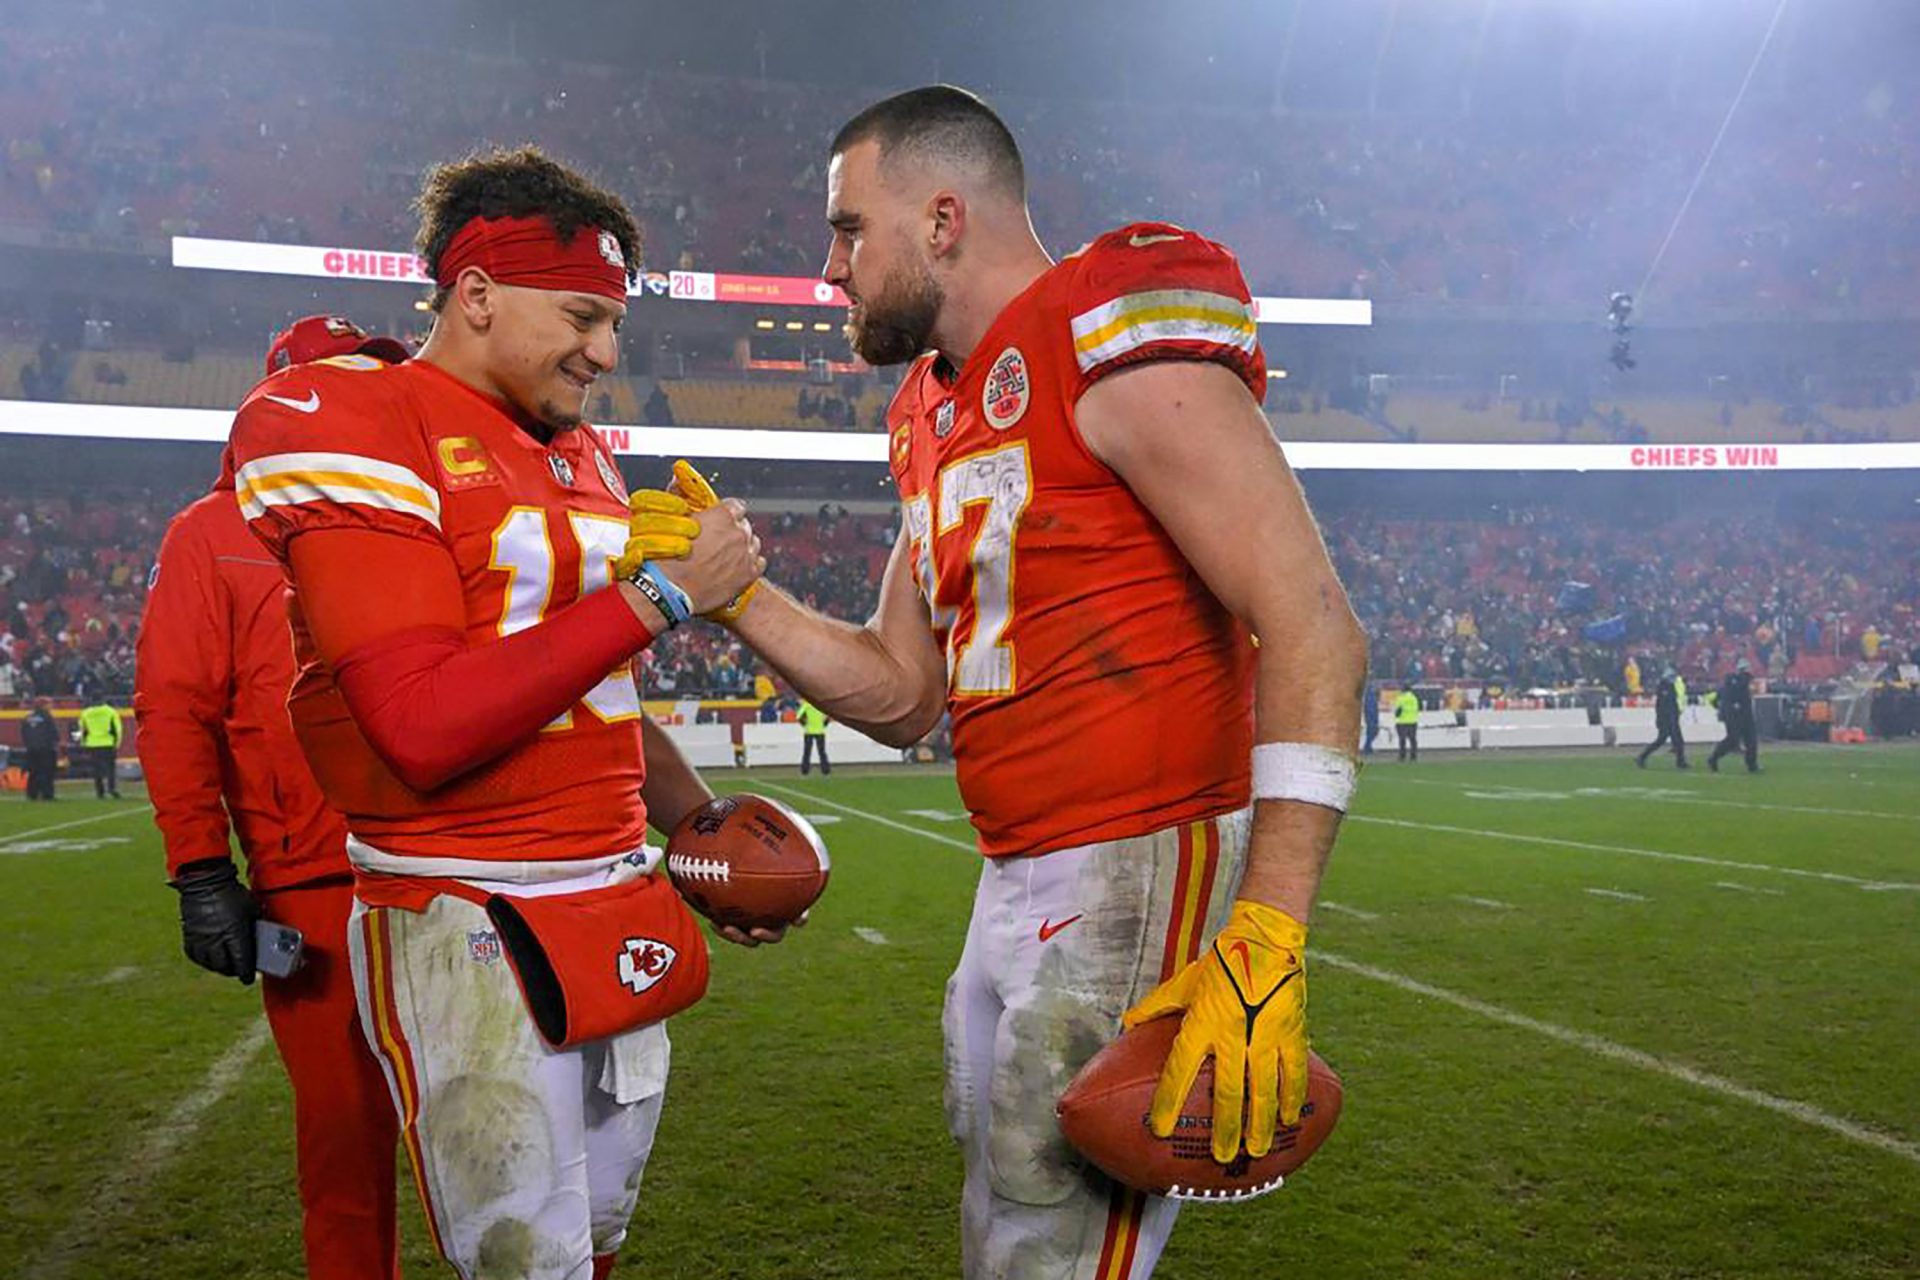 Prediction: Travis Kelce shows out